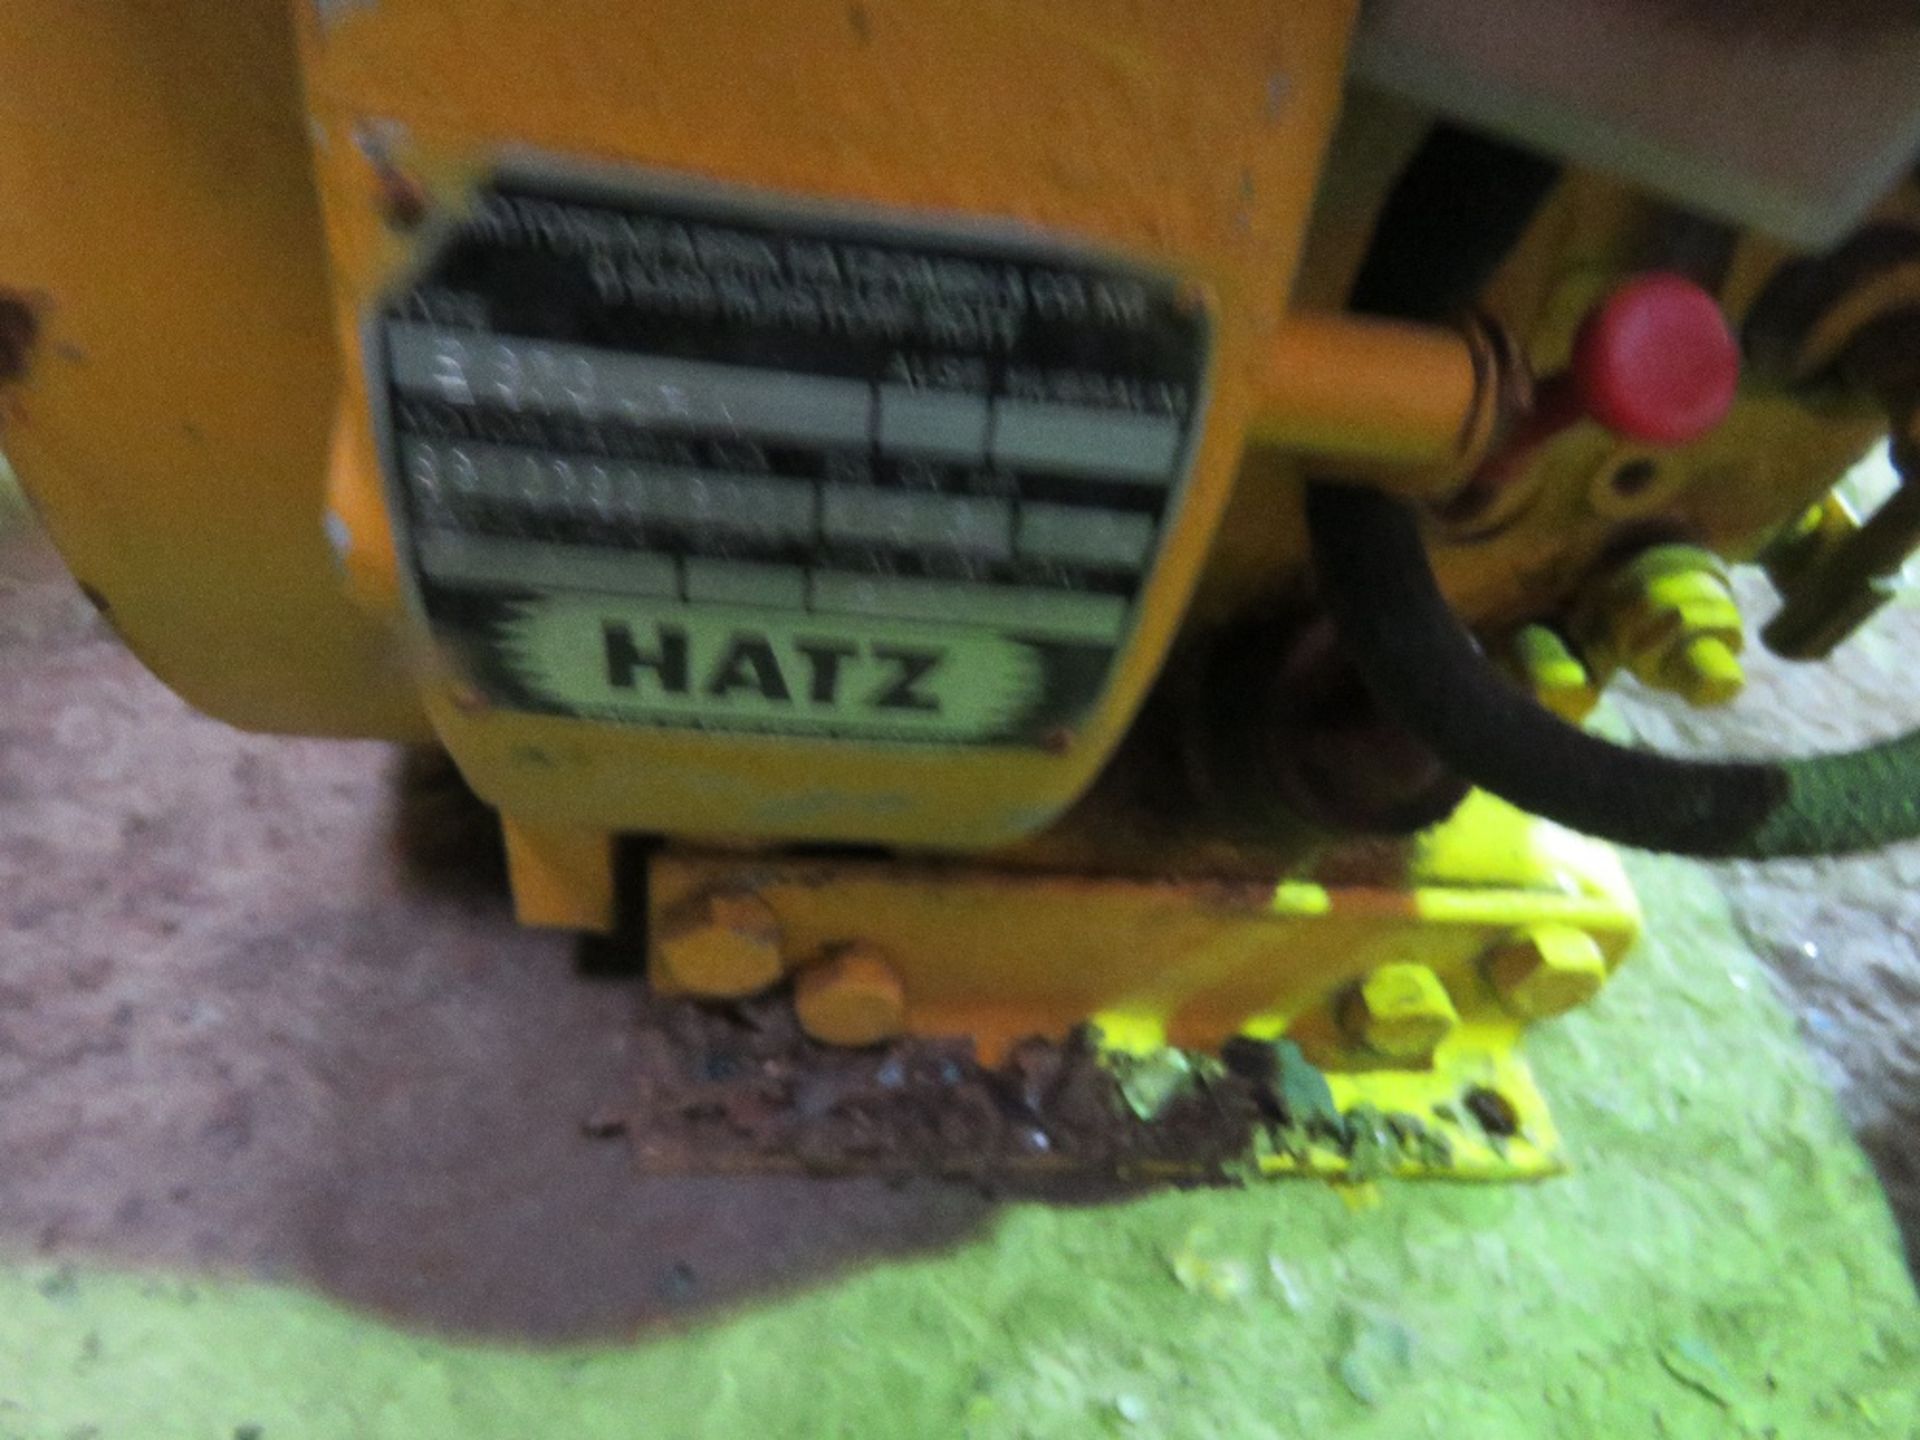 HATZ TYPE SINGLE CYLINDER DIESEL ENGINE WITH A HANDLE. - Image 4 of 4